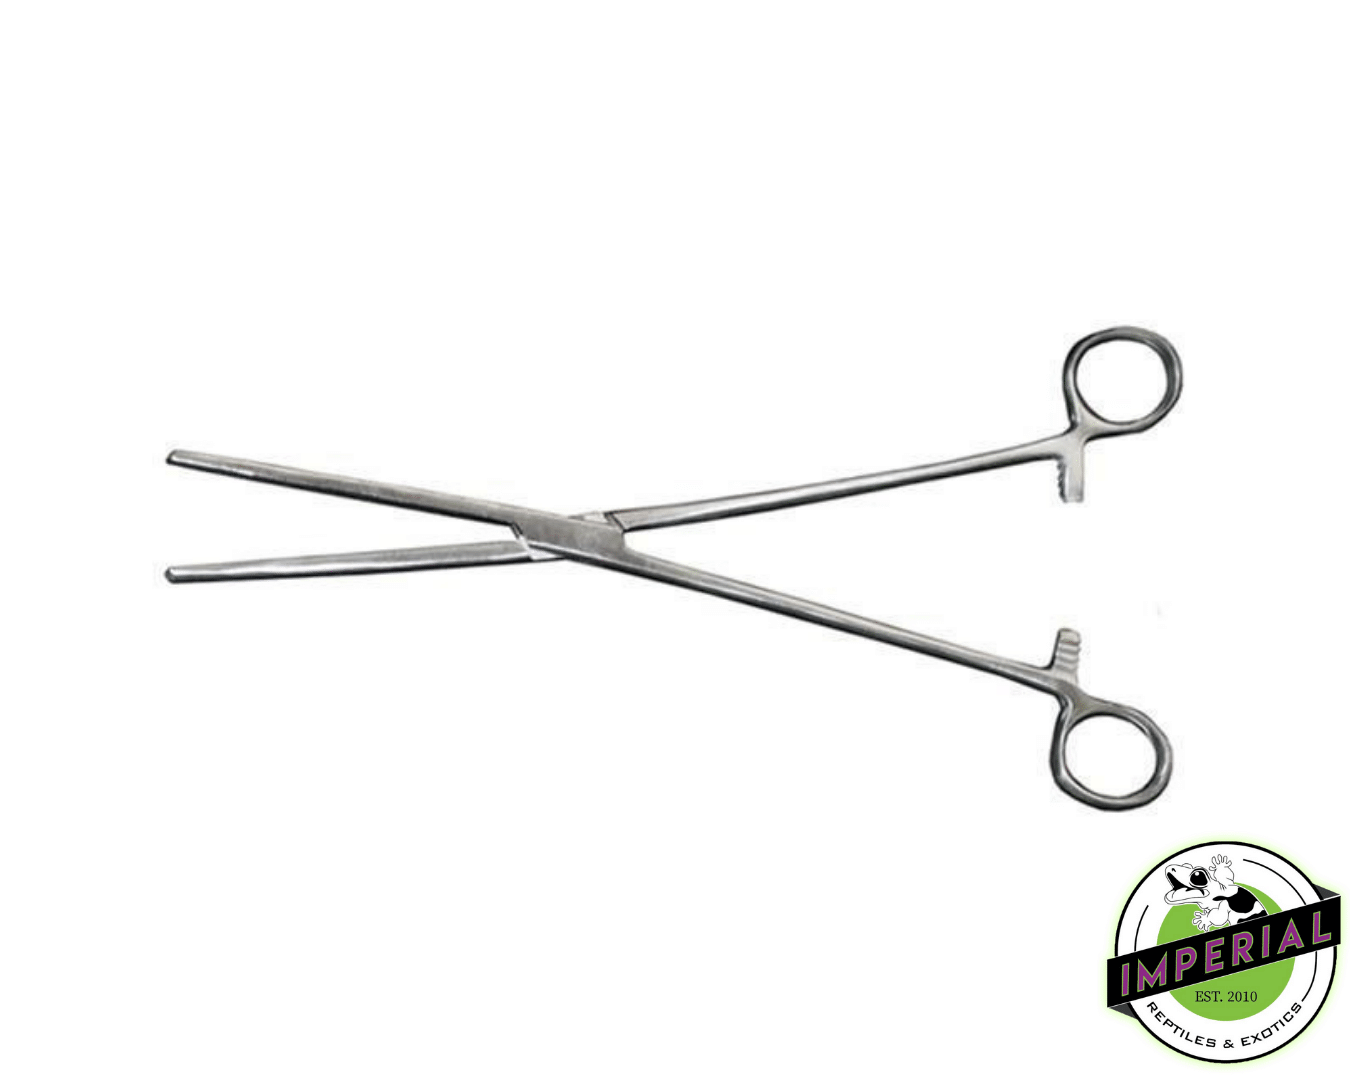 reptile feeding tongs for sale online, buy cheap reptile supplies near me